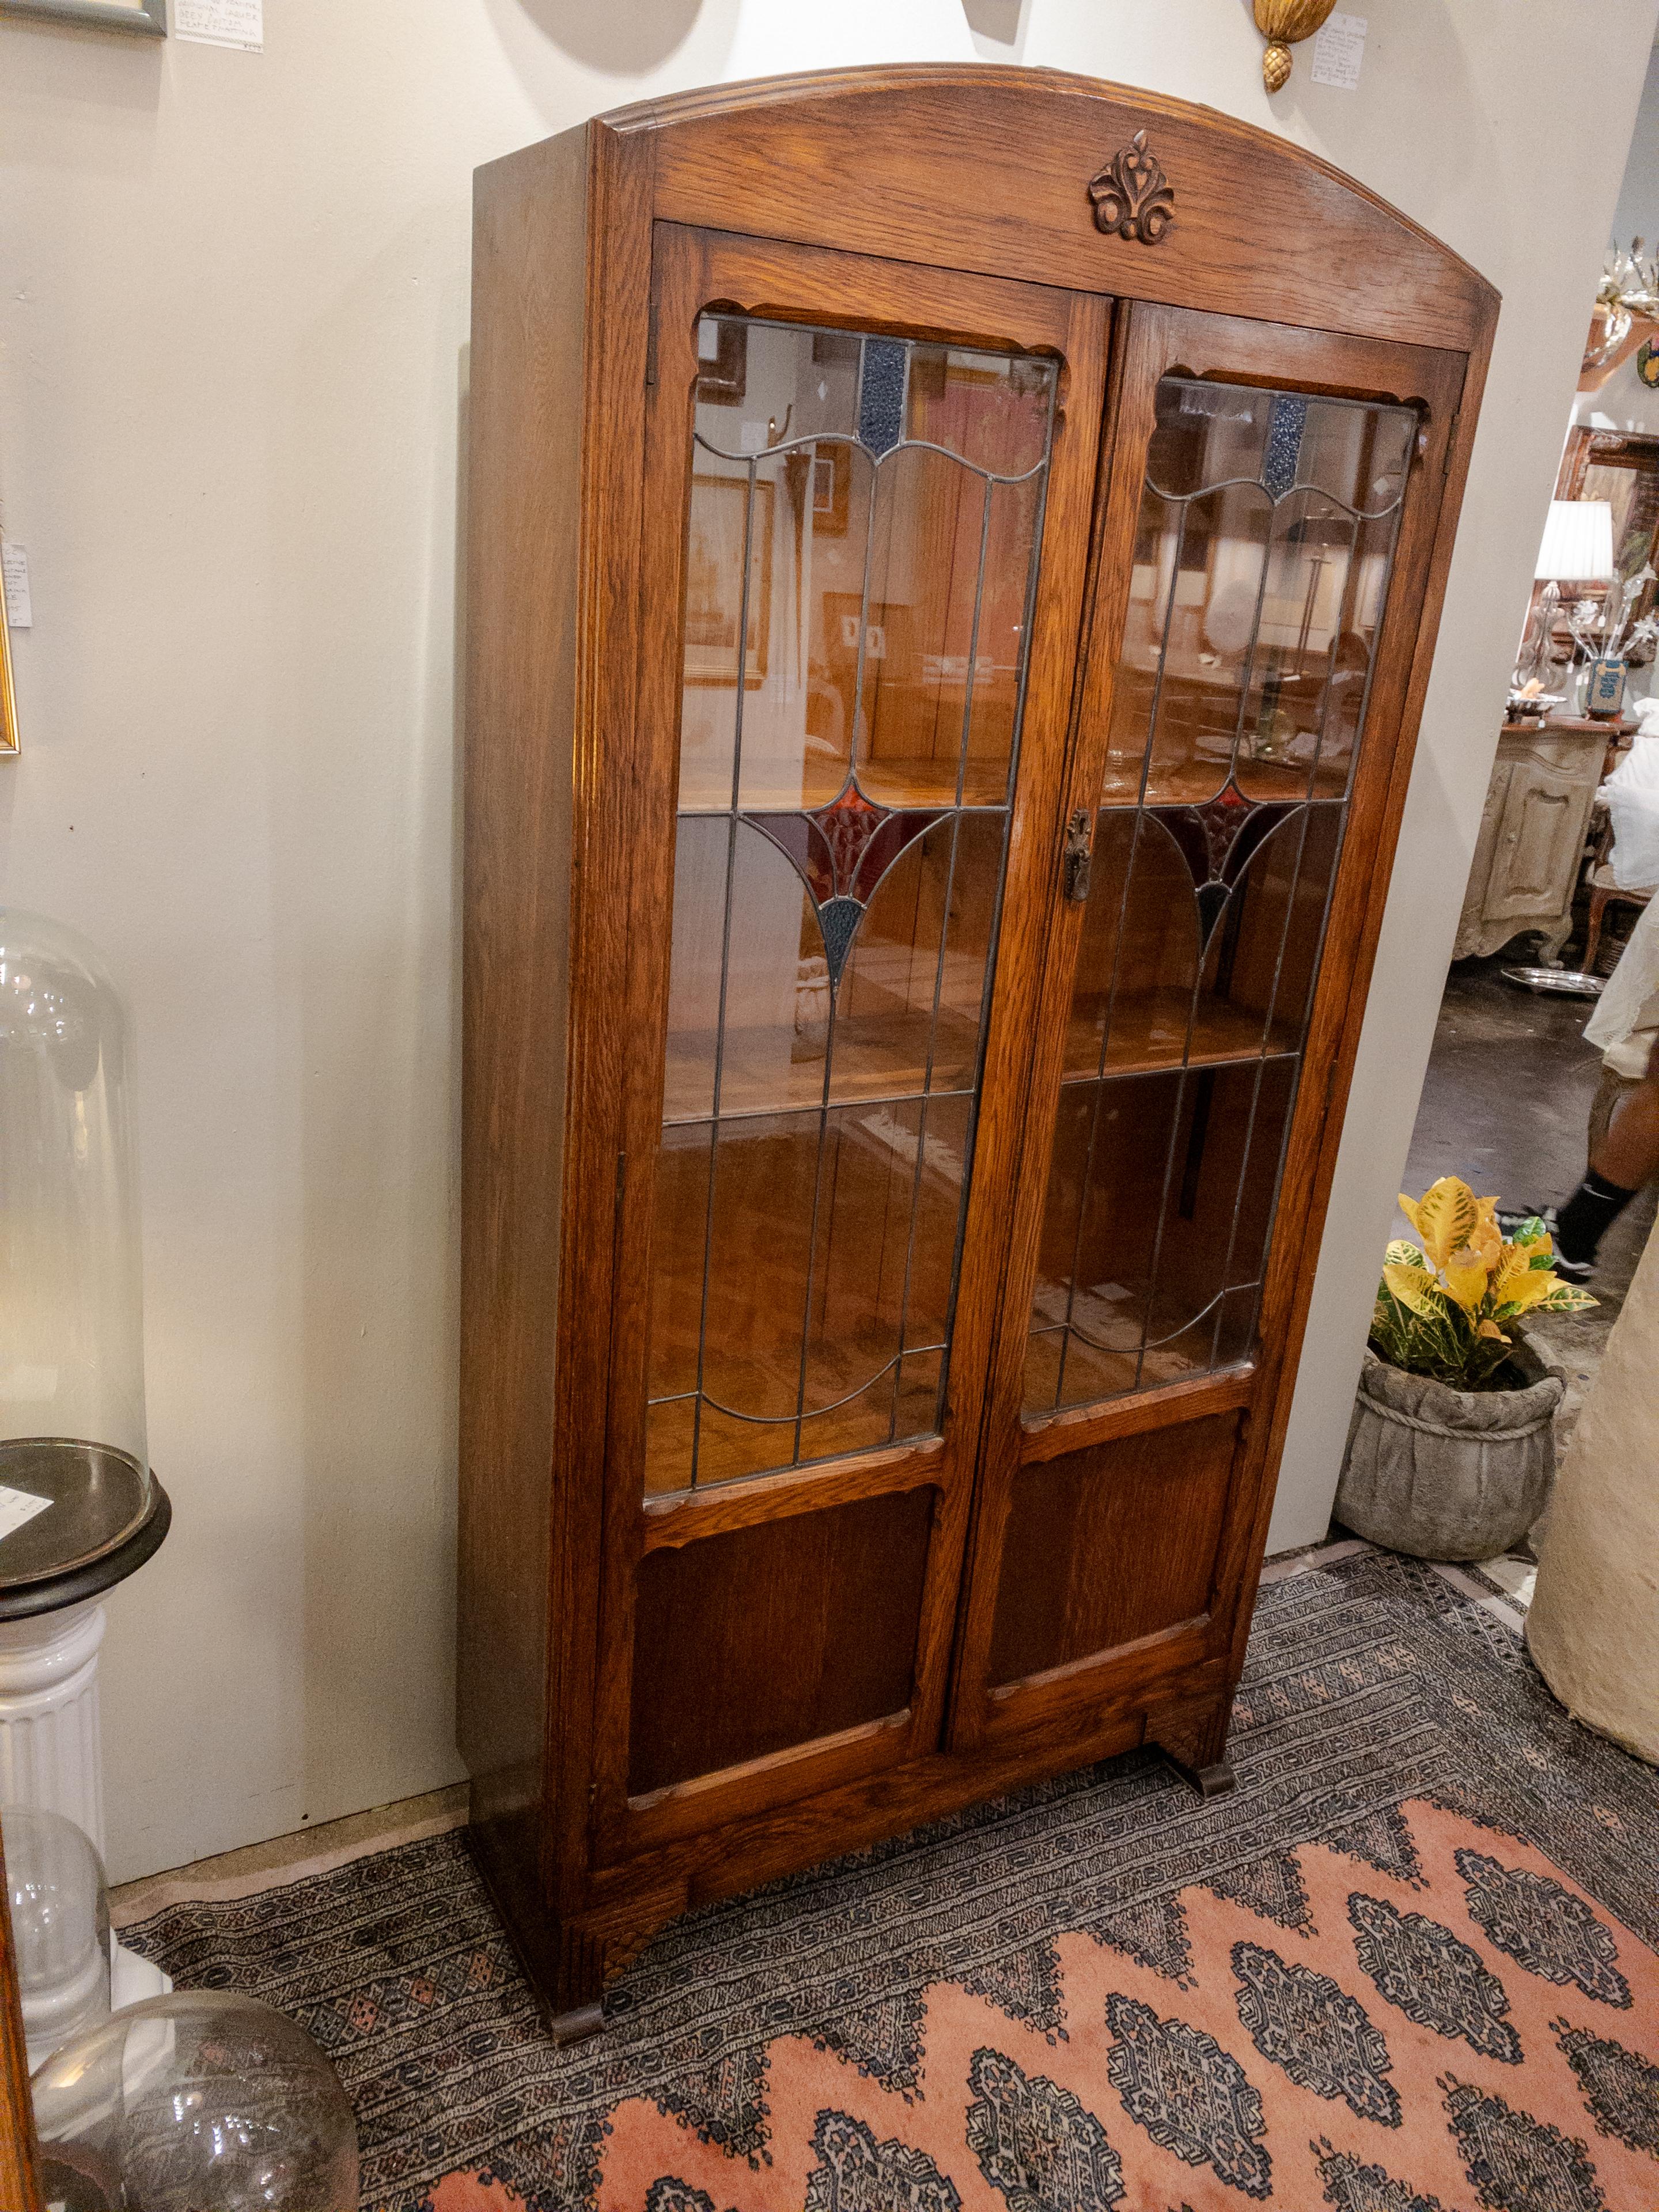 American Antique Arts and Crafts Style Oak Bookcase with Leaded Stained Glass Door Fronts